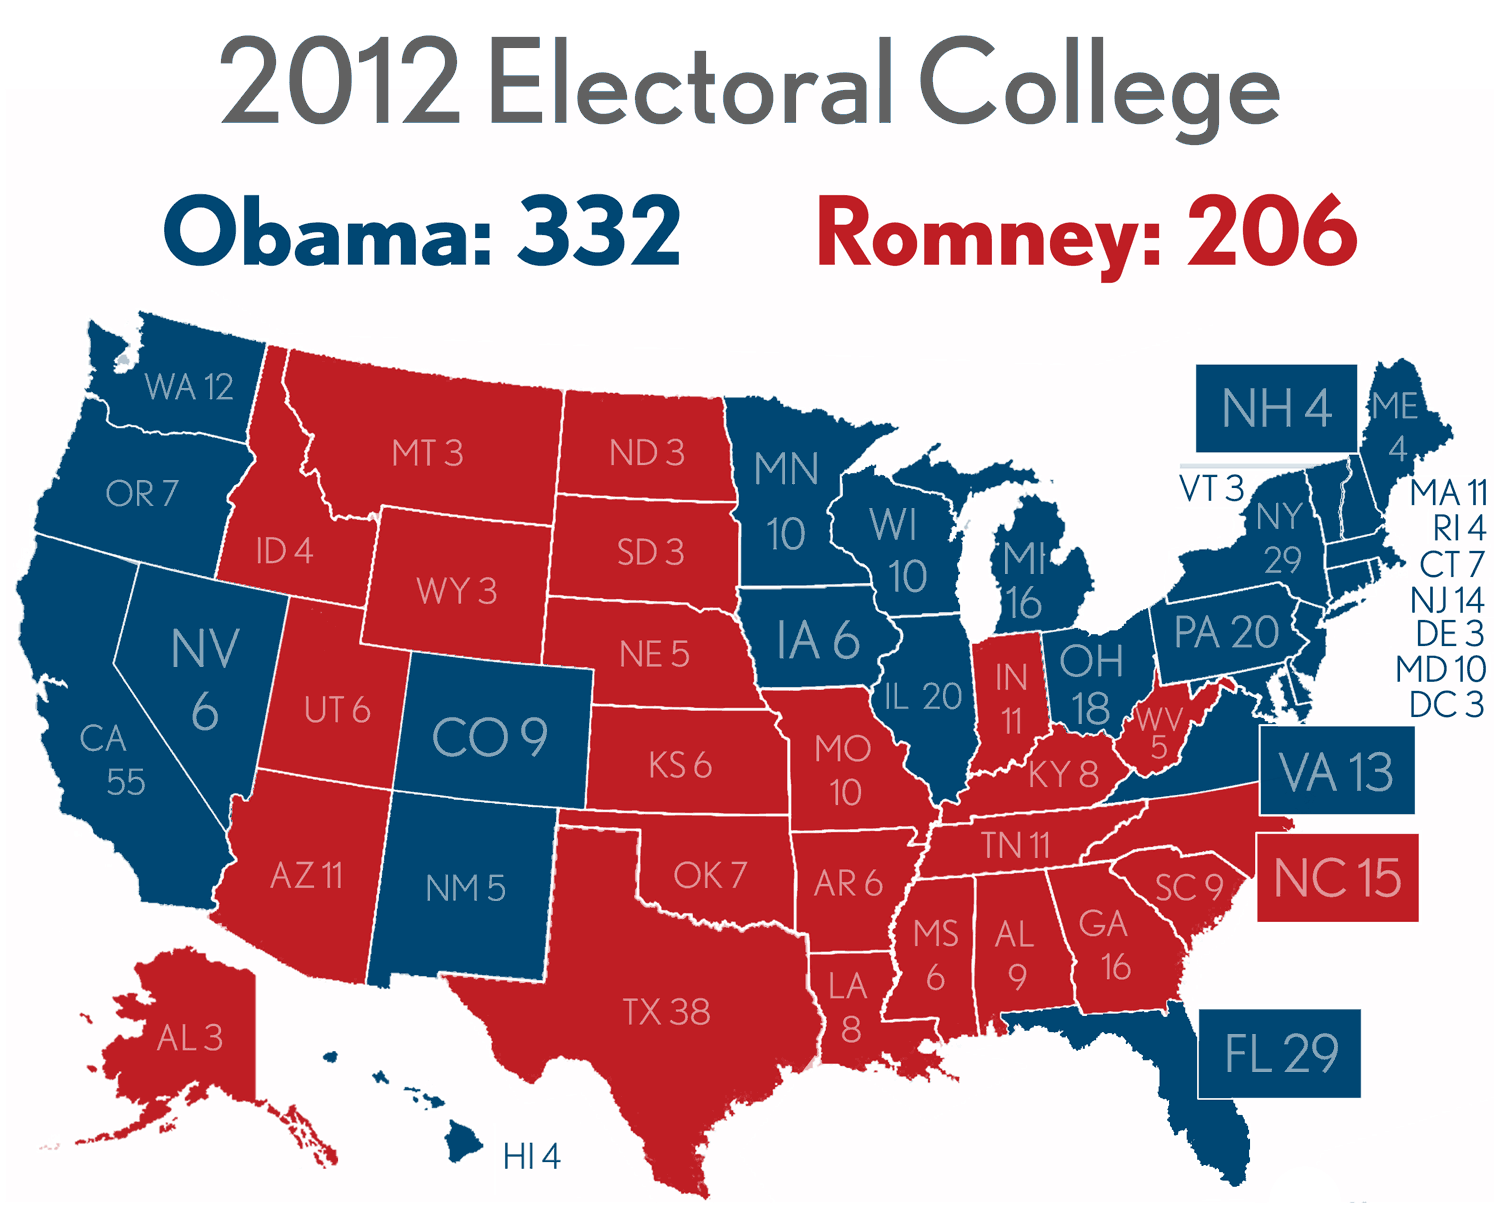 how many electoral votes does florida have in 2012